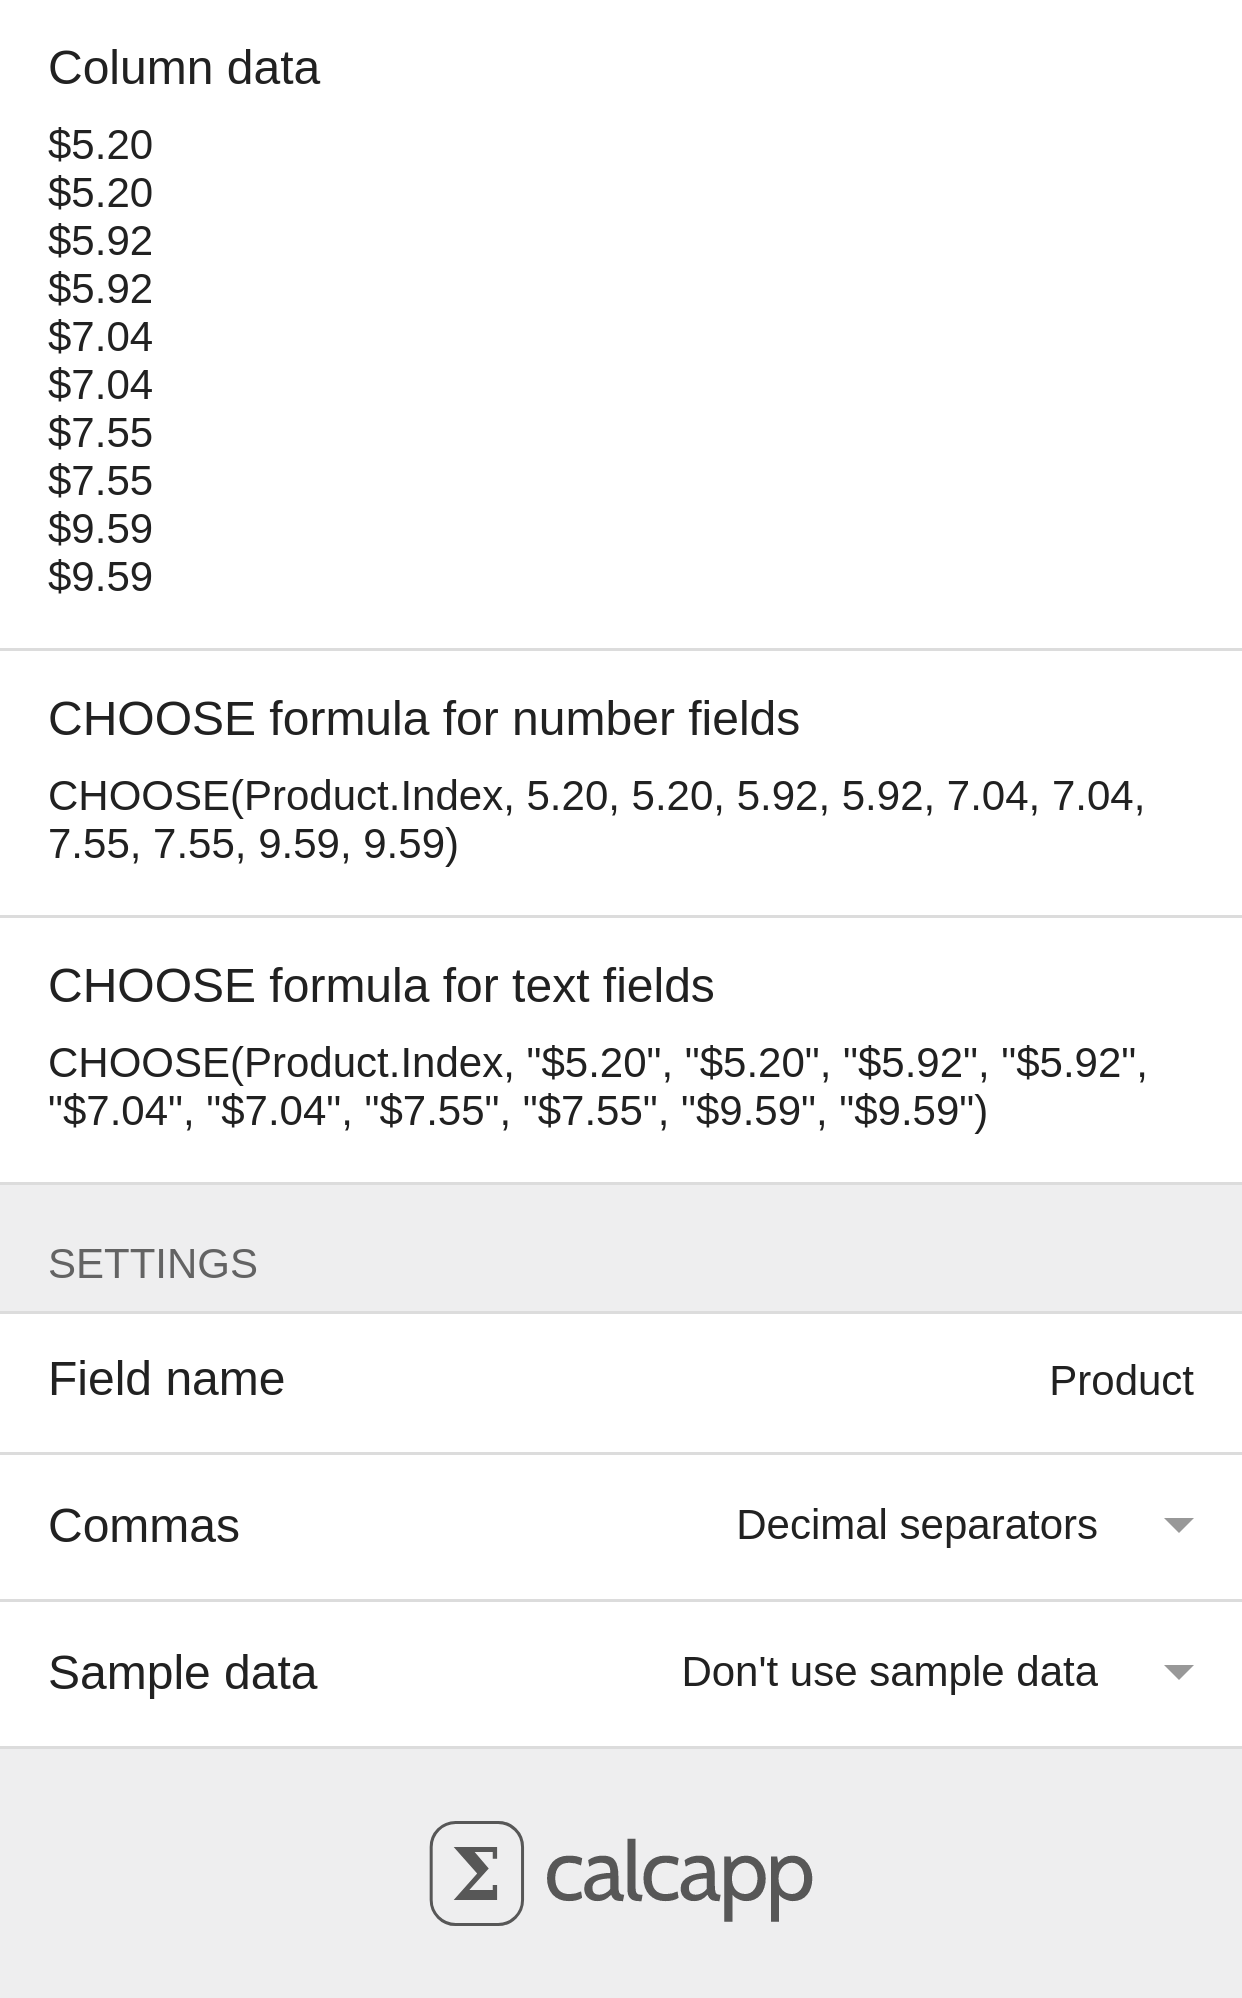 An app converting column data for use with CHOOSE formulas